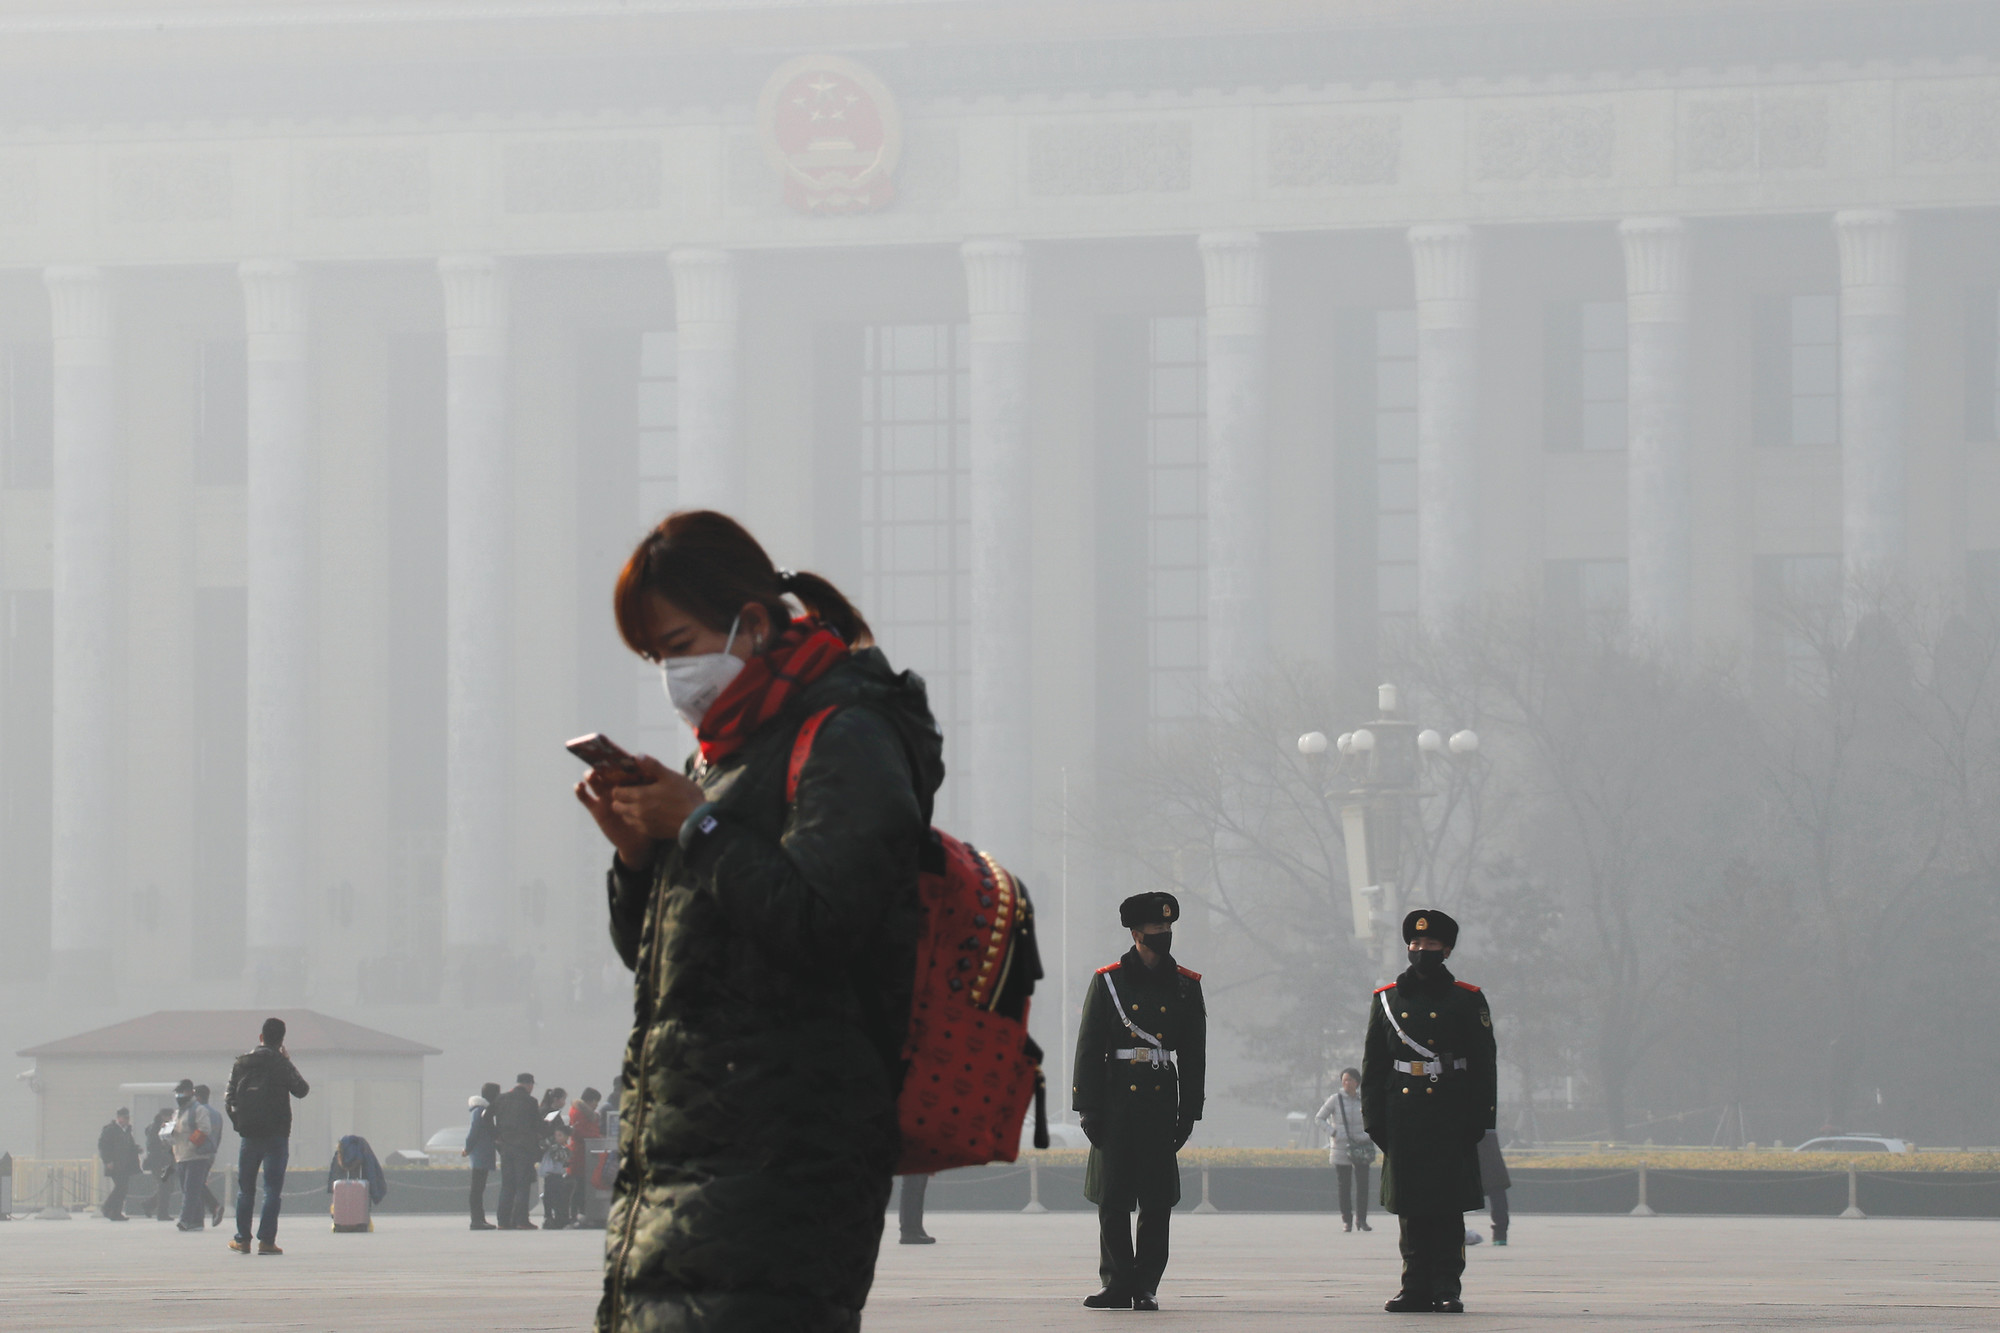 A woman walks past Chinese paramilitary policemen wearing a protection mask on Tiananmen Square in Beijing as the capital of China is blanketed by heavy smog in 2017. China has long faced some of the worst air pollution in the world, blamed on its reliance of coal for energy and factory production, as well as a surplus of older, less-efficient cars on its roads. Inadequate controls on industry and lax enforcement of standards have worsened the pollution problem.